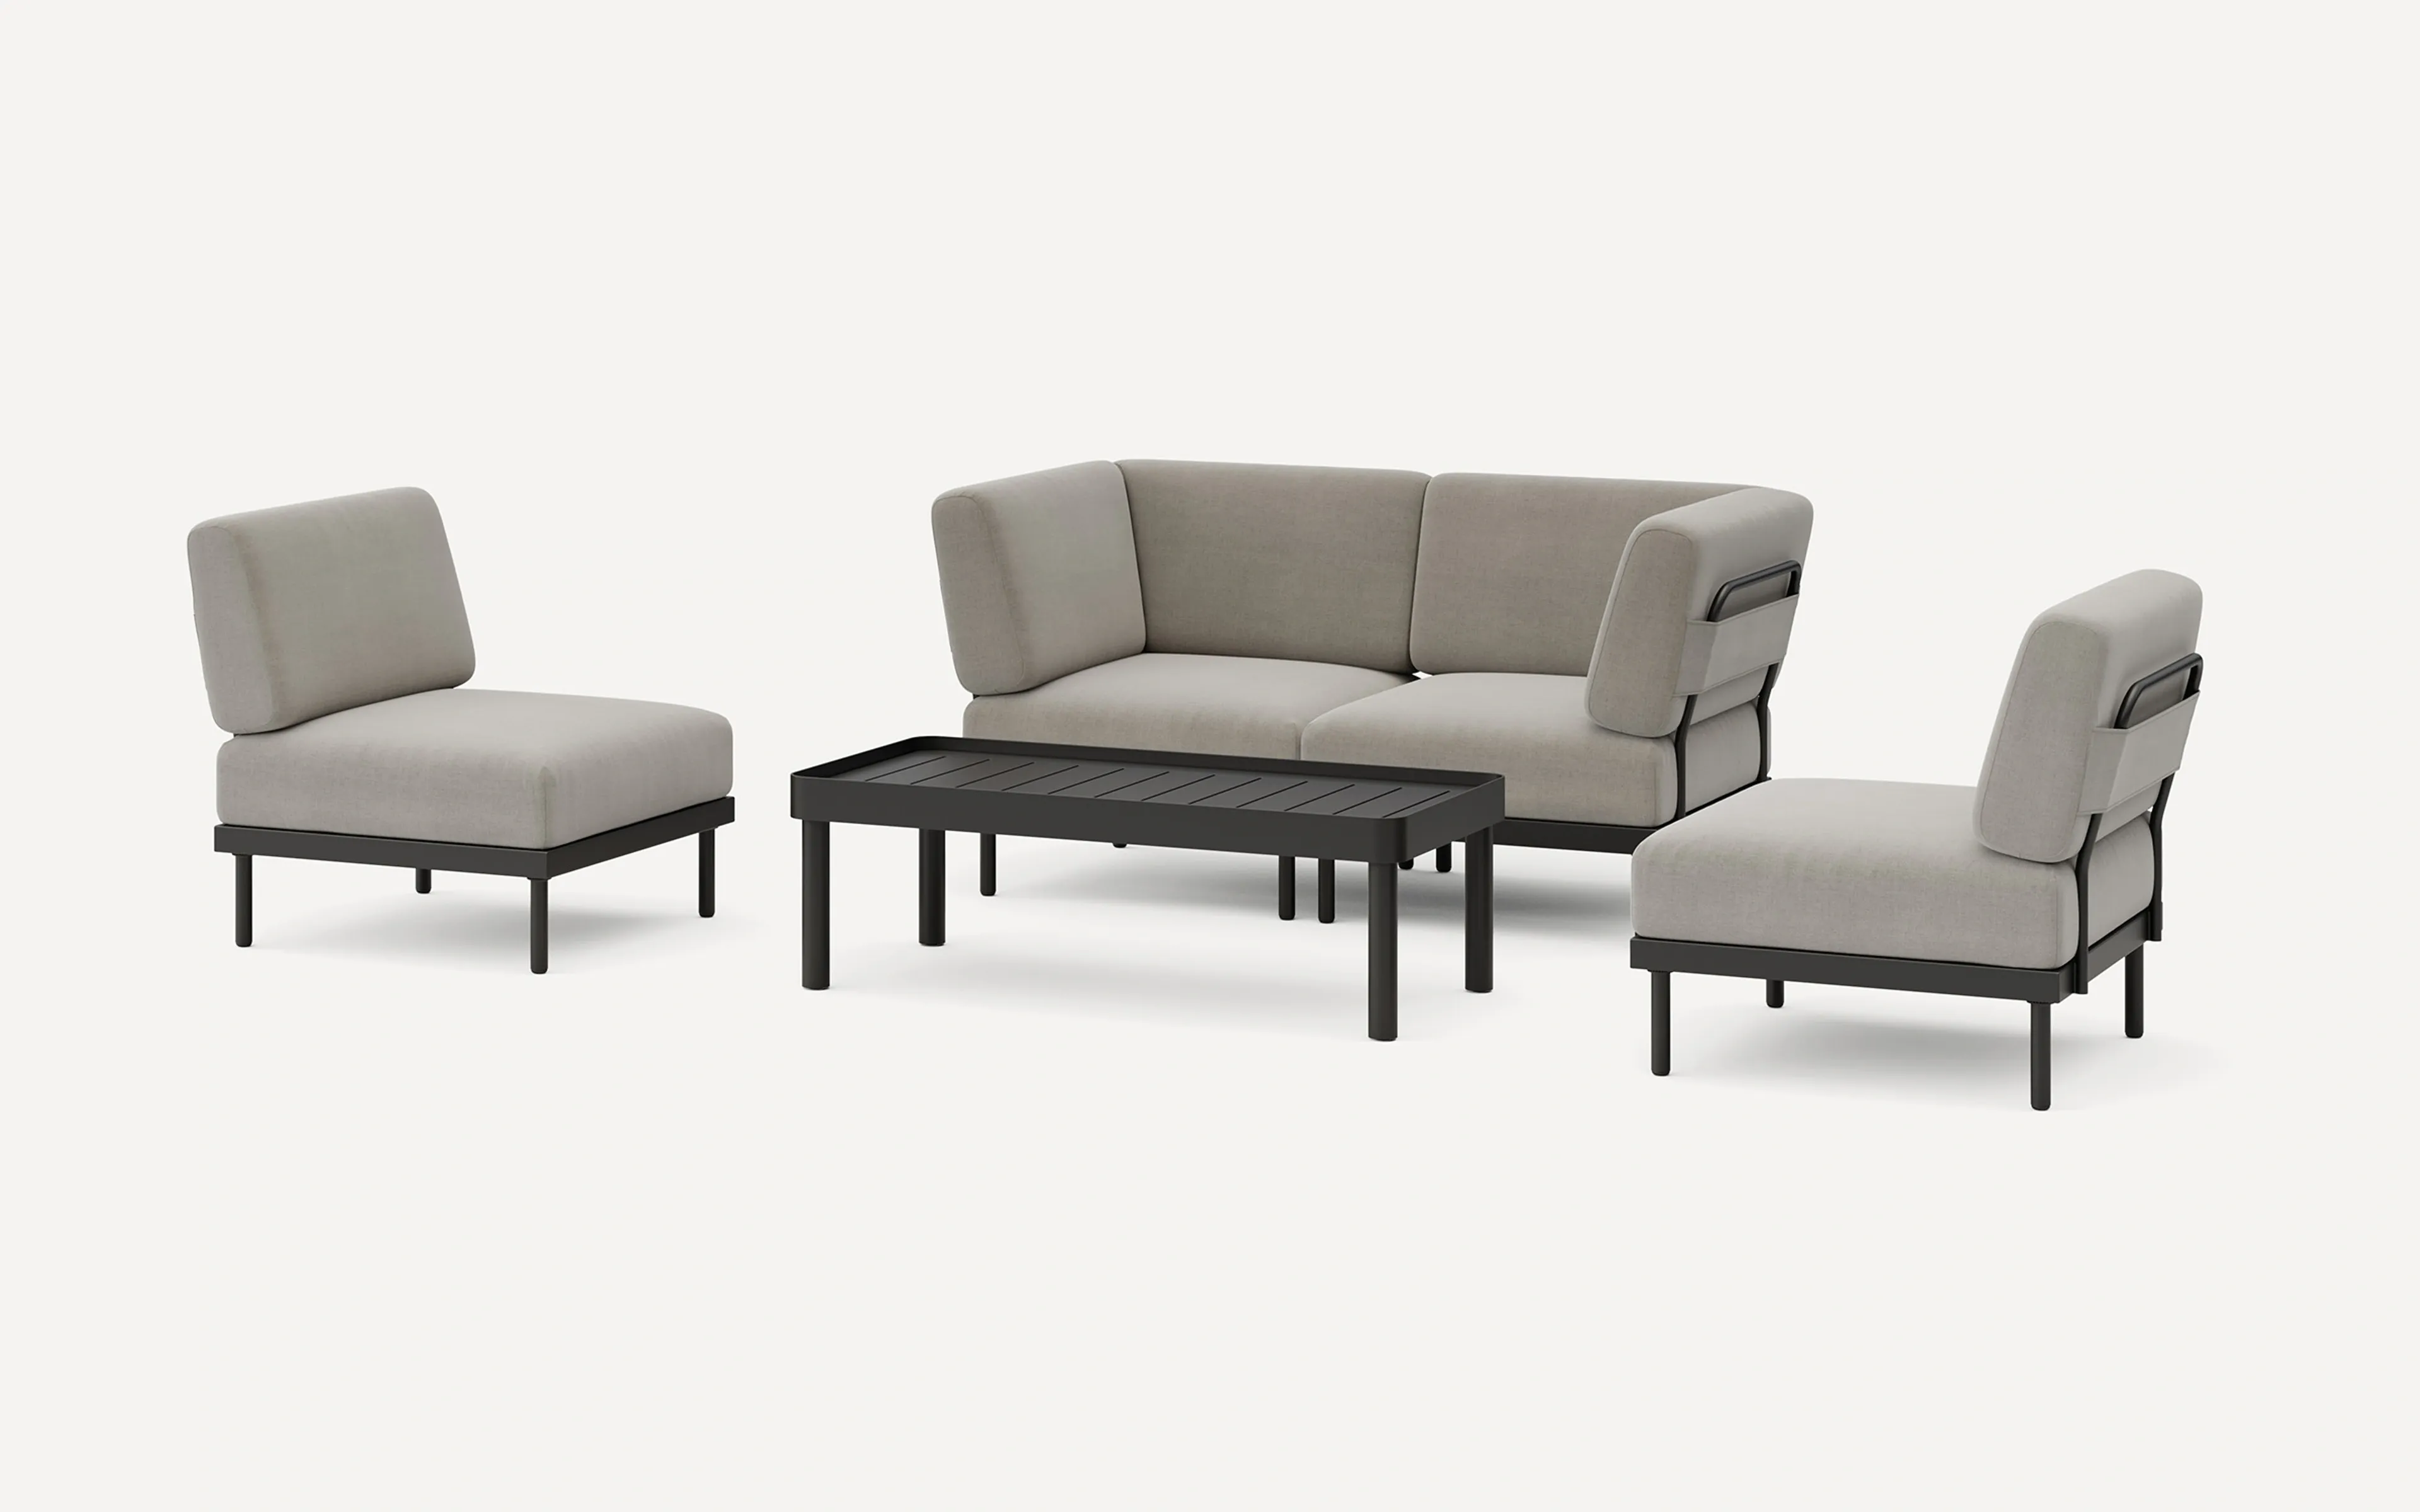 Relay Outdoor 2-Piece Sofa, 2 Chairs, & Coffee Table Set